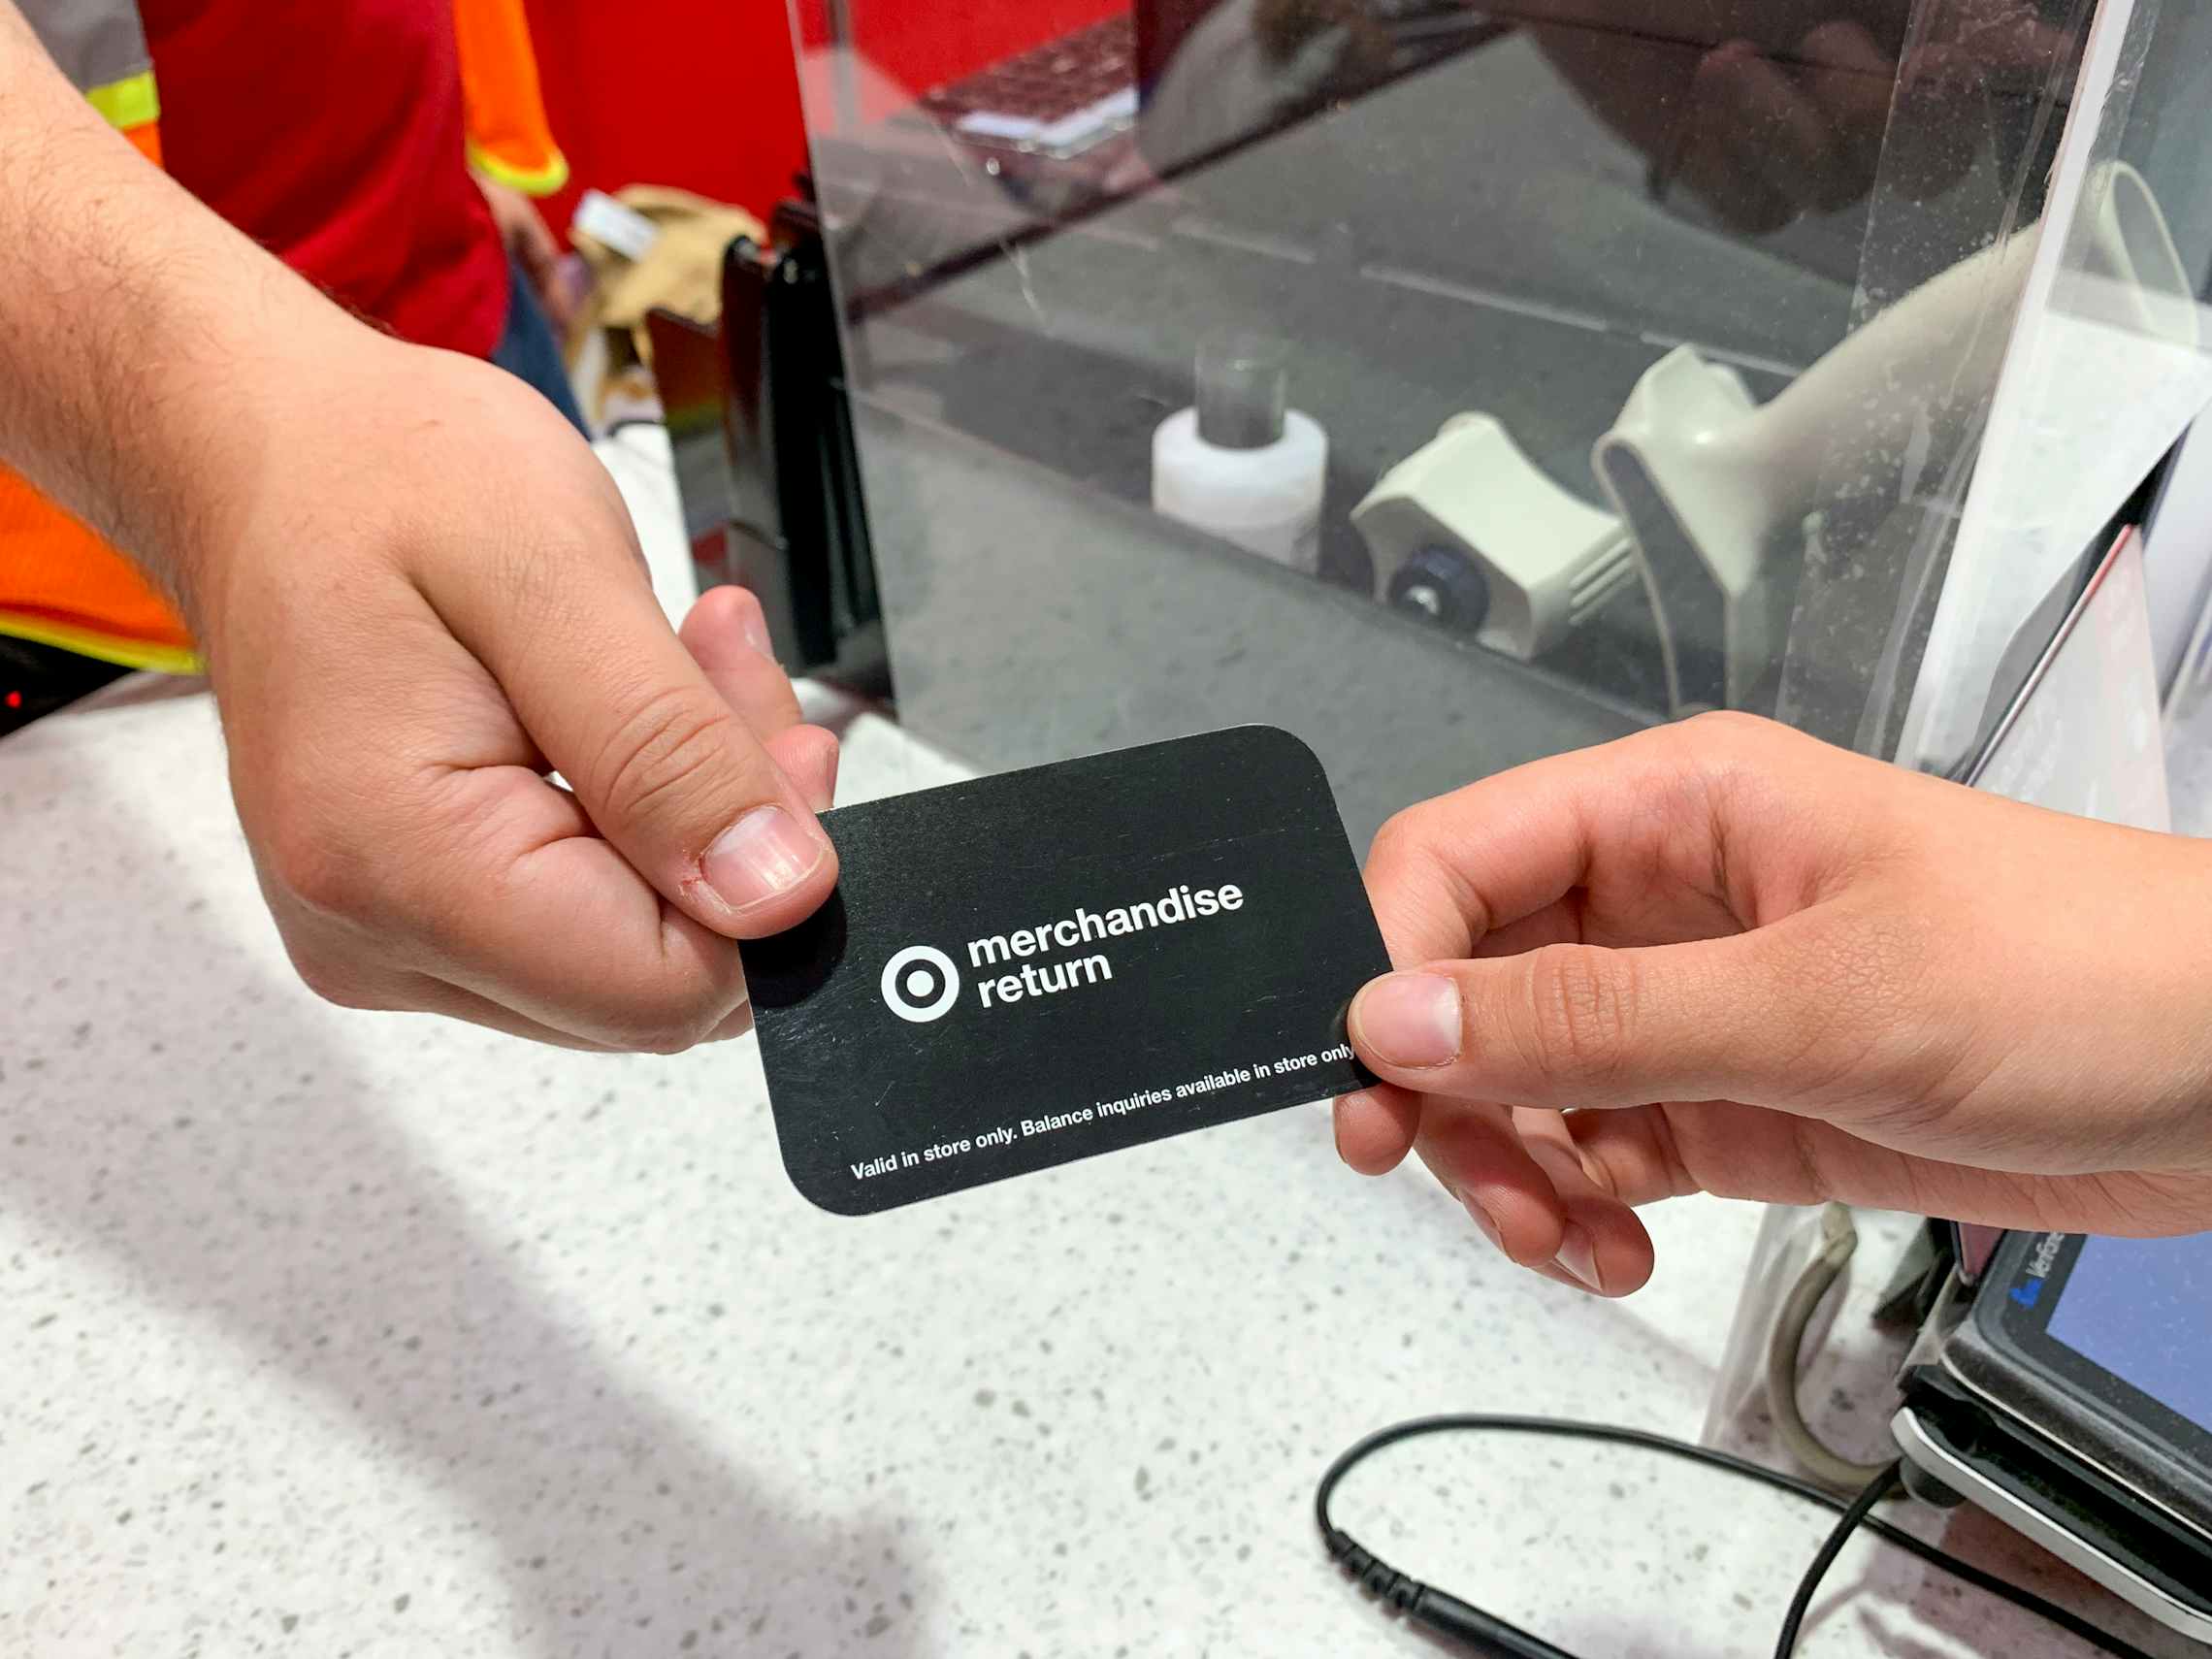 A Target employee handing a merchandise return card to a customer at the checkout counter.